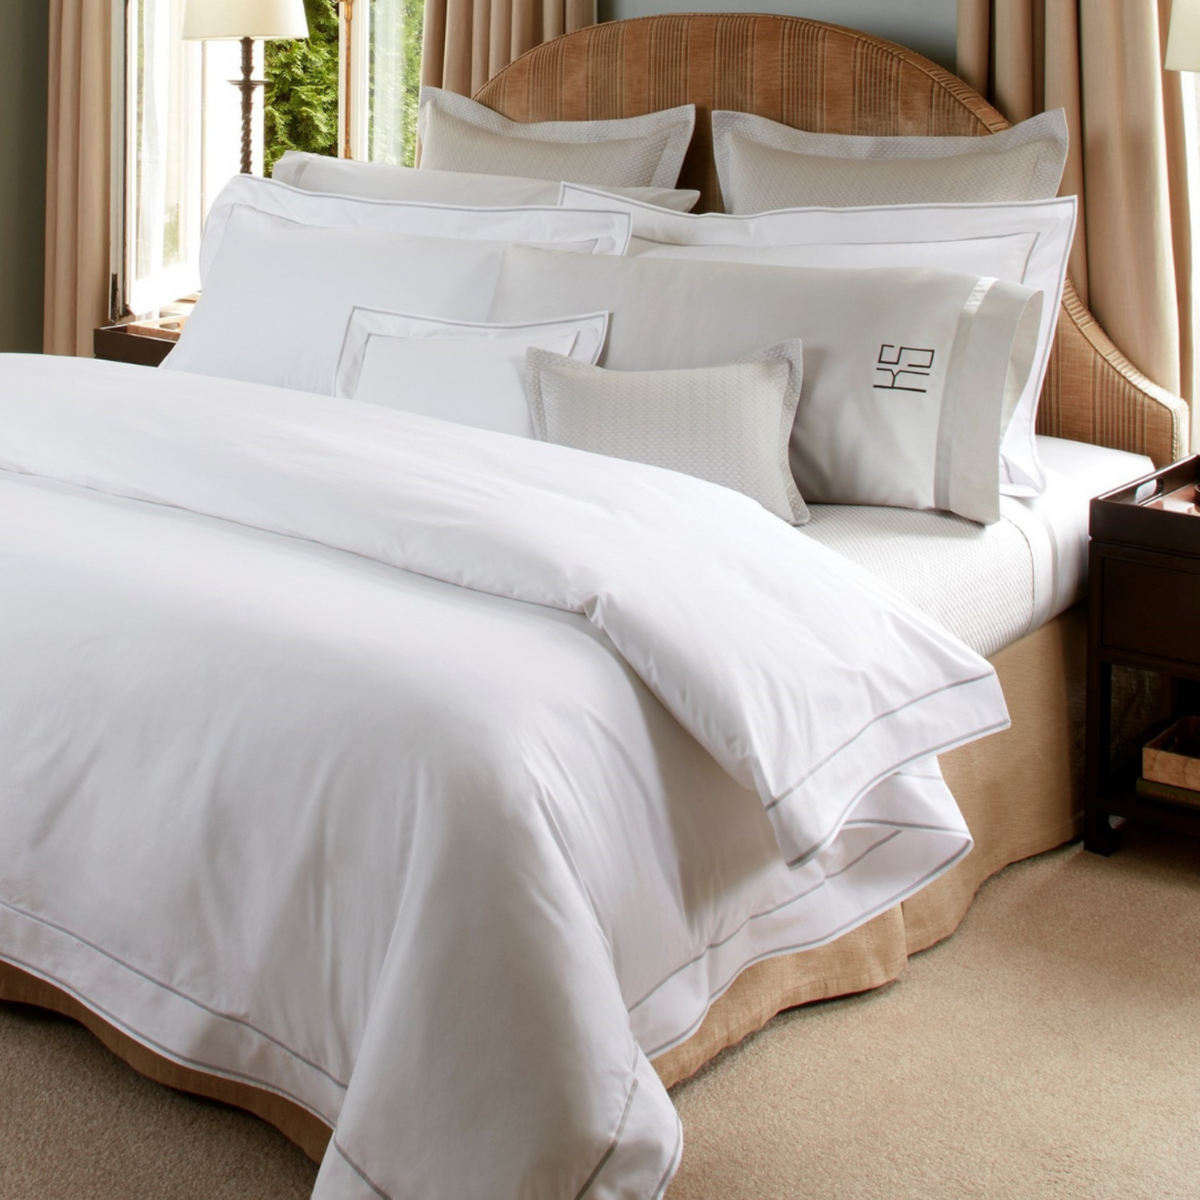 Matouk Ansonia Bedding Collection Lifestyle Pillows and Linens